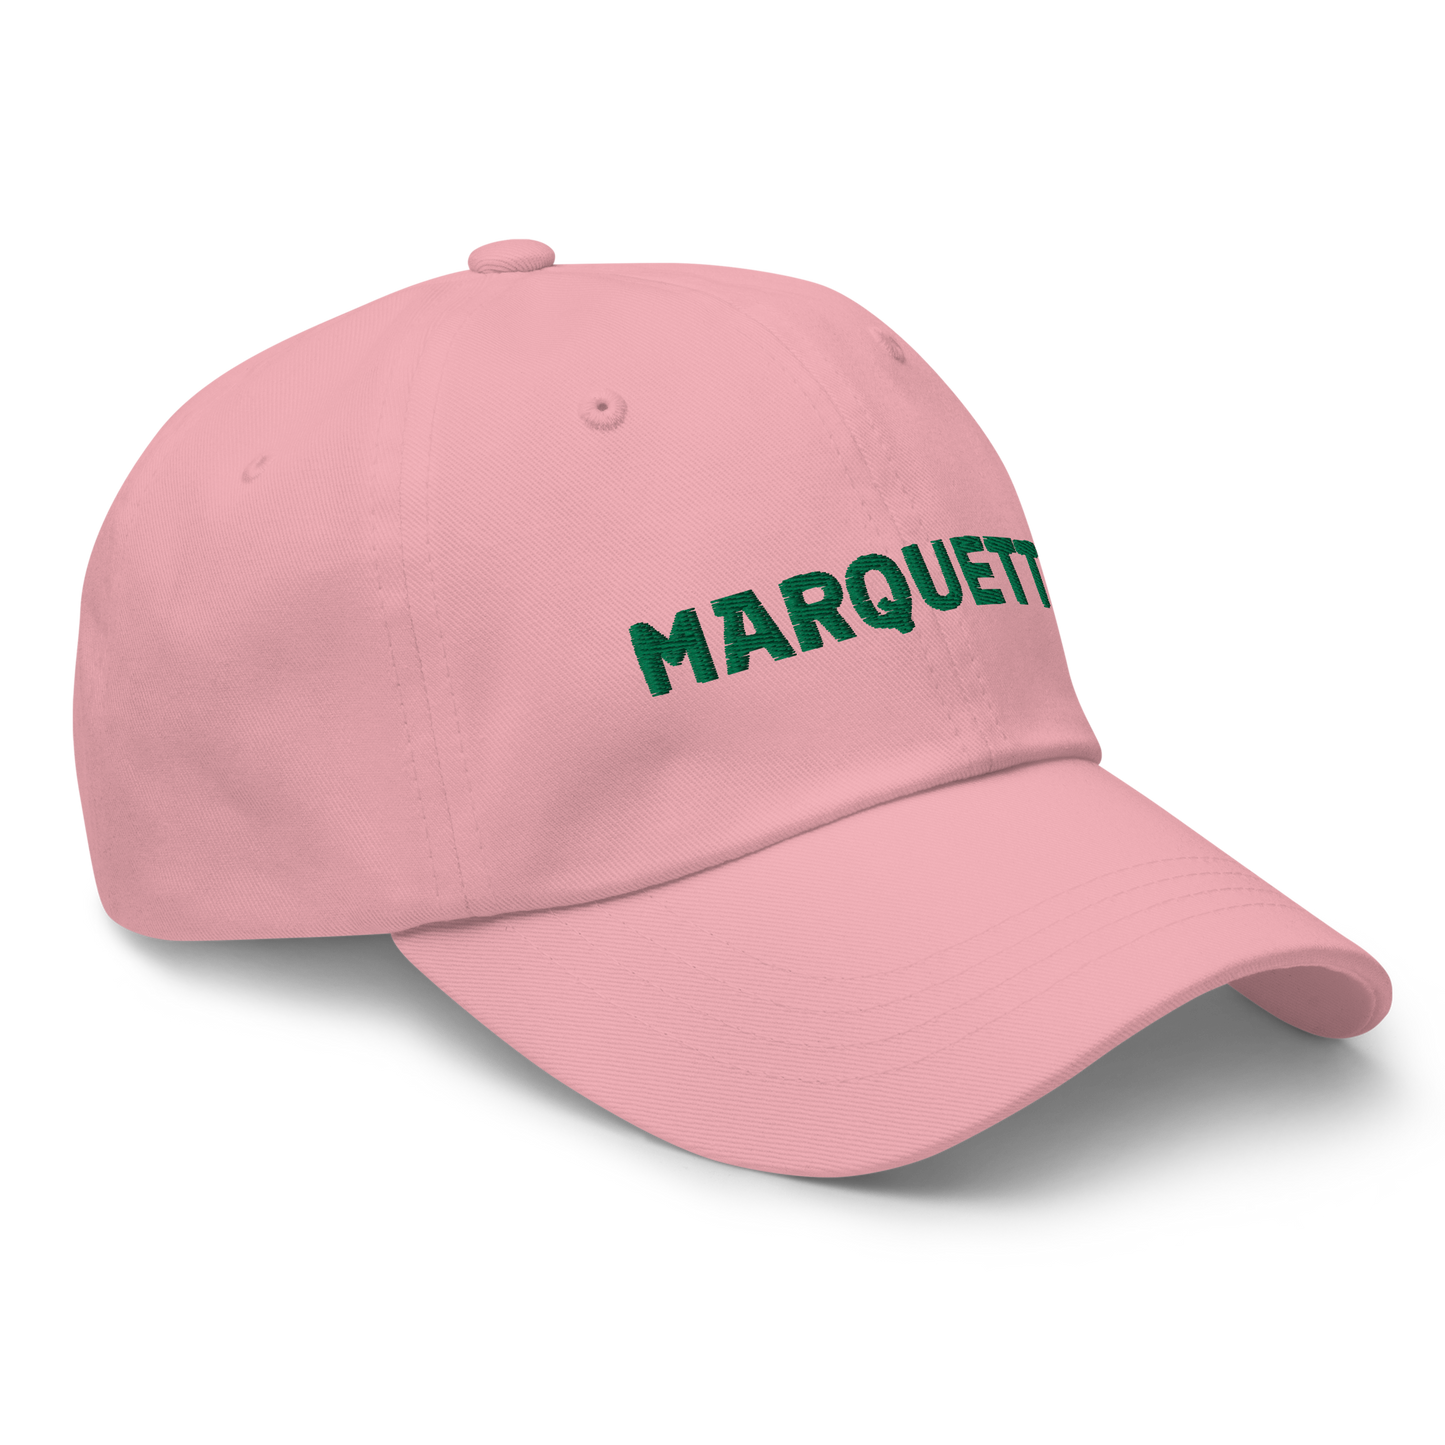 'Marquette' Dad Hat | Gold/Green Embroidery